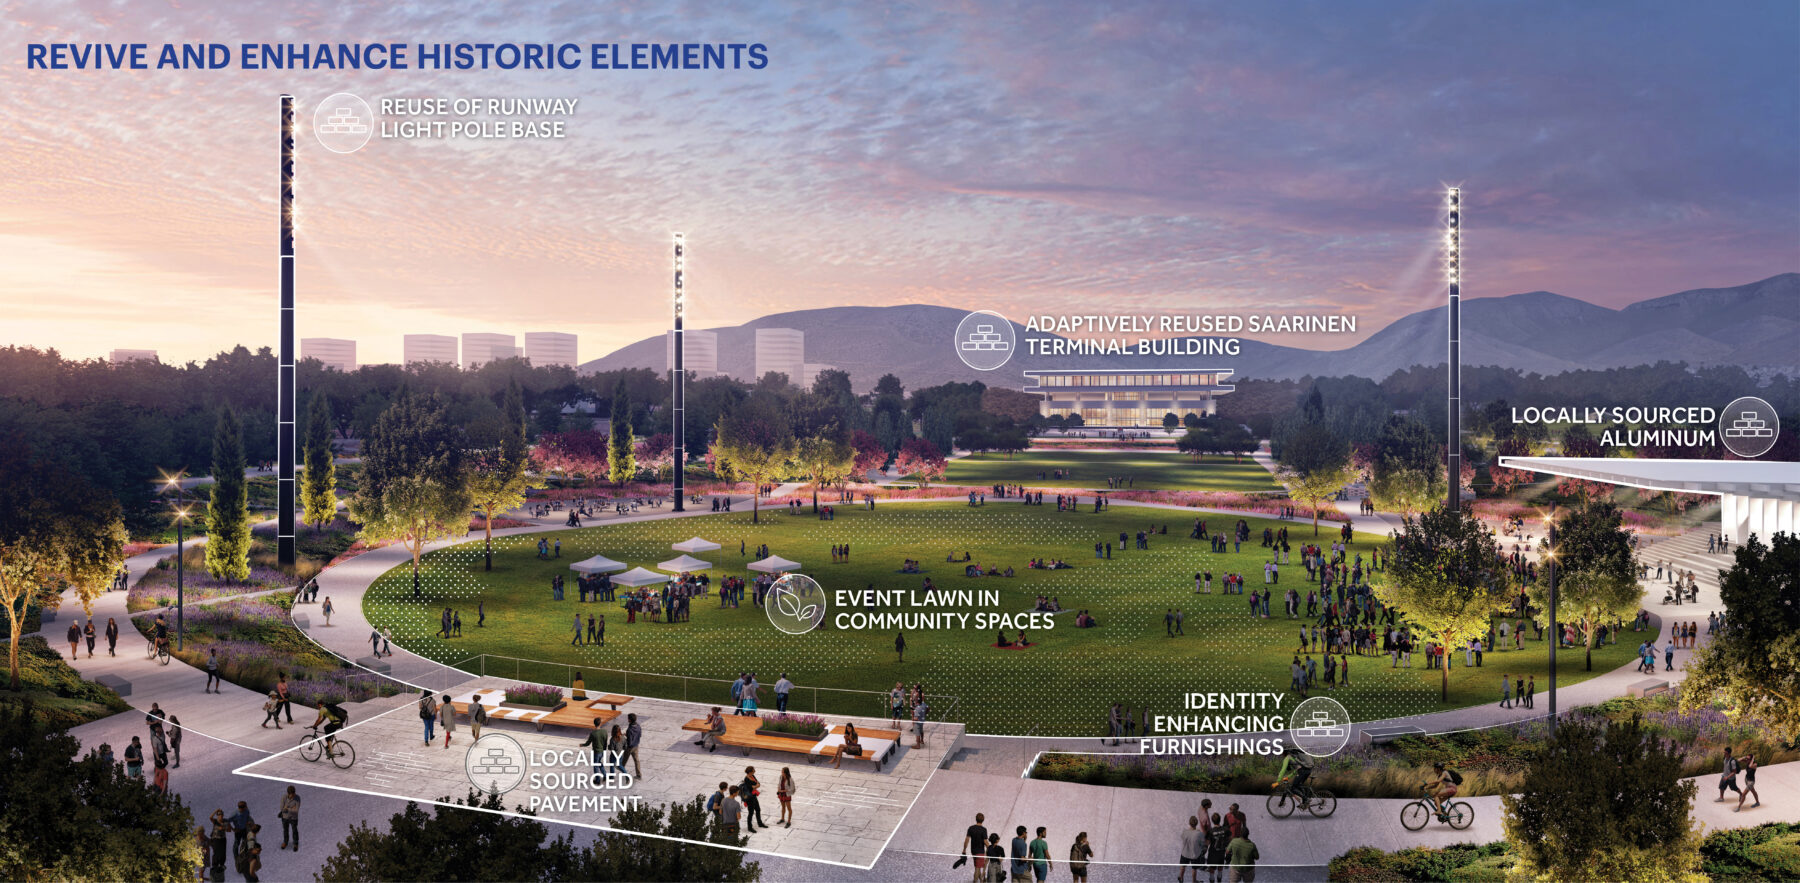 Rendering of park showing the rivived and enhanced historic elements